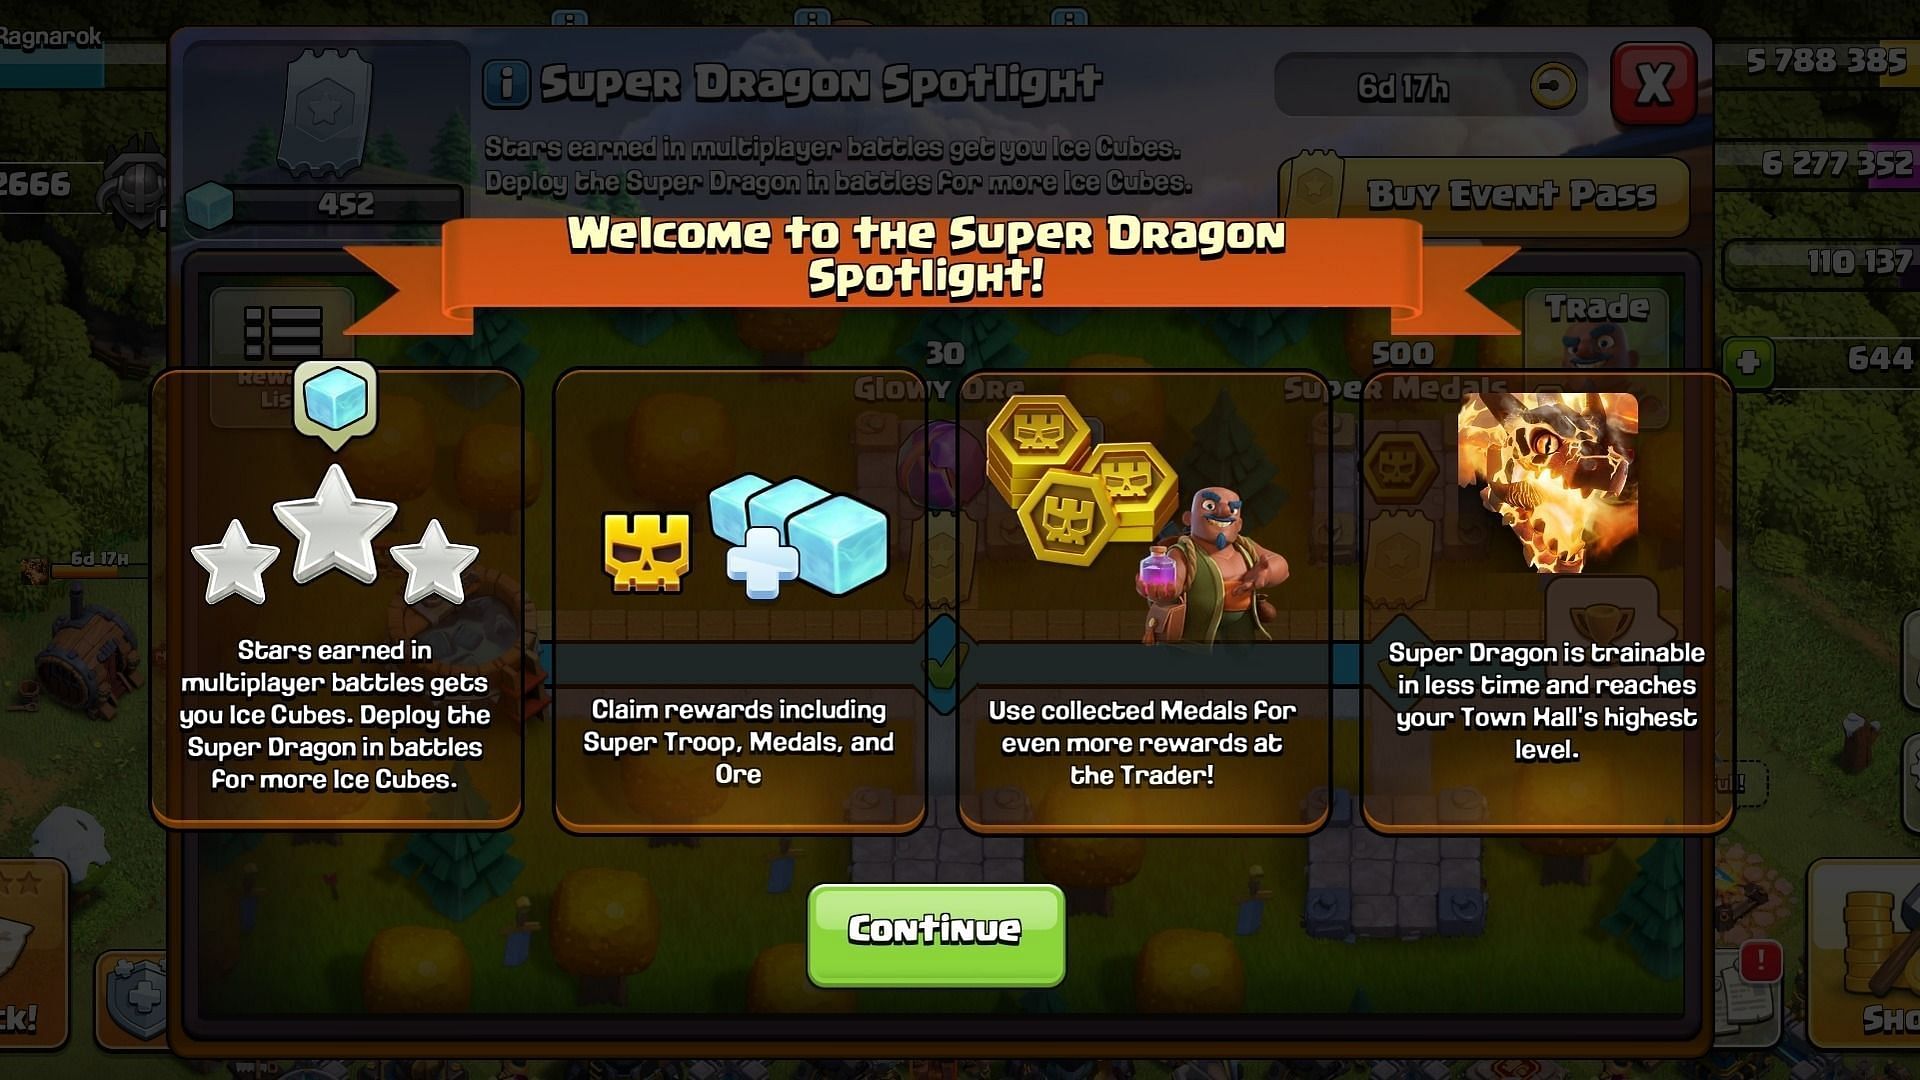 Collect Super Medals (Image via Supercell)